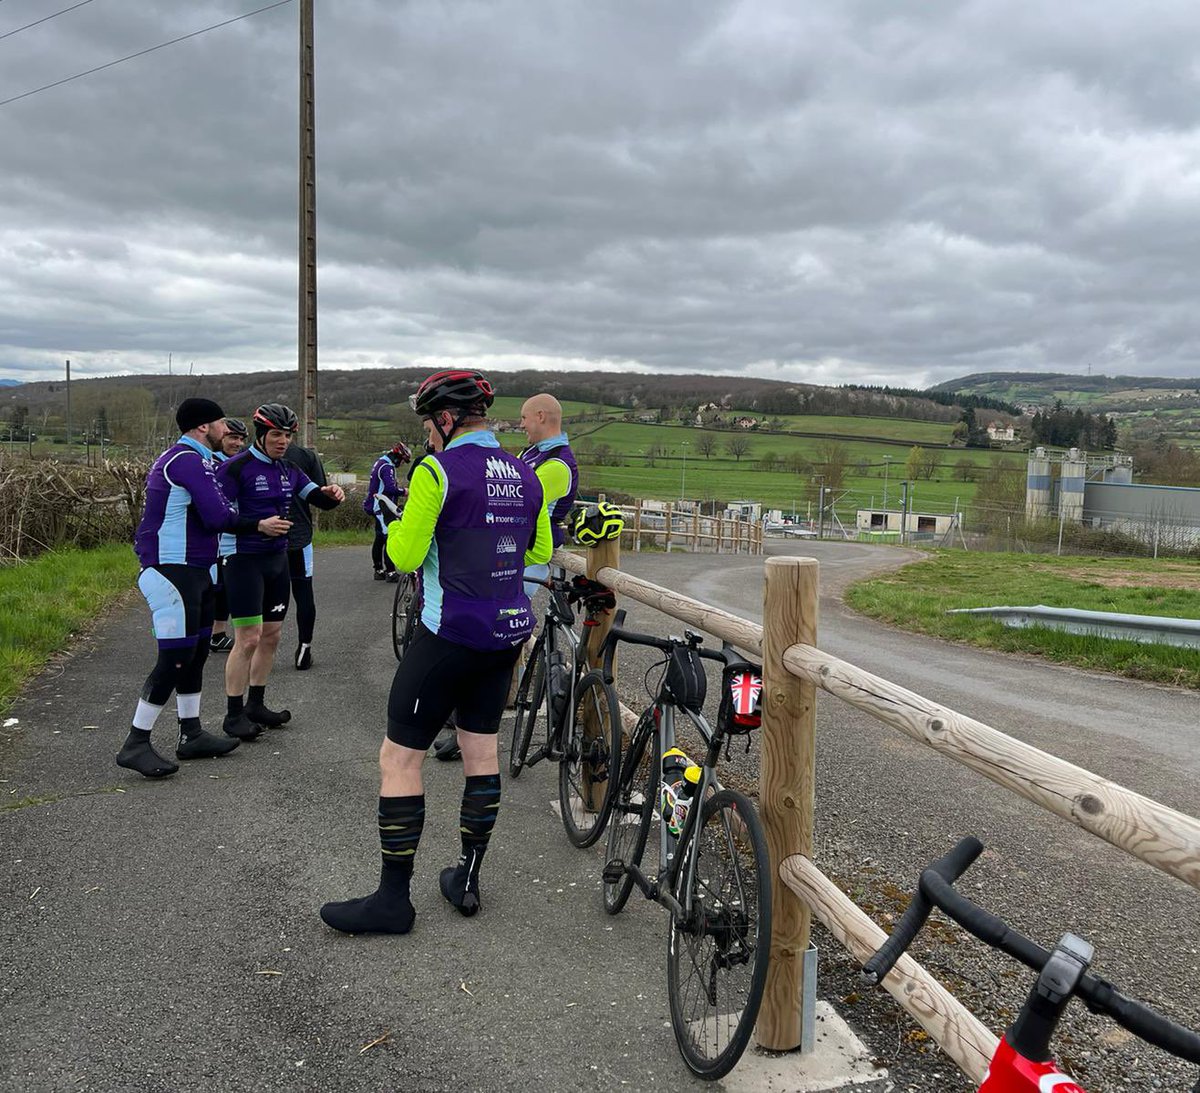 Day 6 P2P update. Arrived in Lyon after another gruelling day on the road for our riders. Everyone a bit sore but safe. Beautiful scenery today and big hills. A better day for the logistics team too!! Please keep supporting the team, thank you for your kind messages🇬🇧🚴🇫🇷